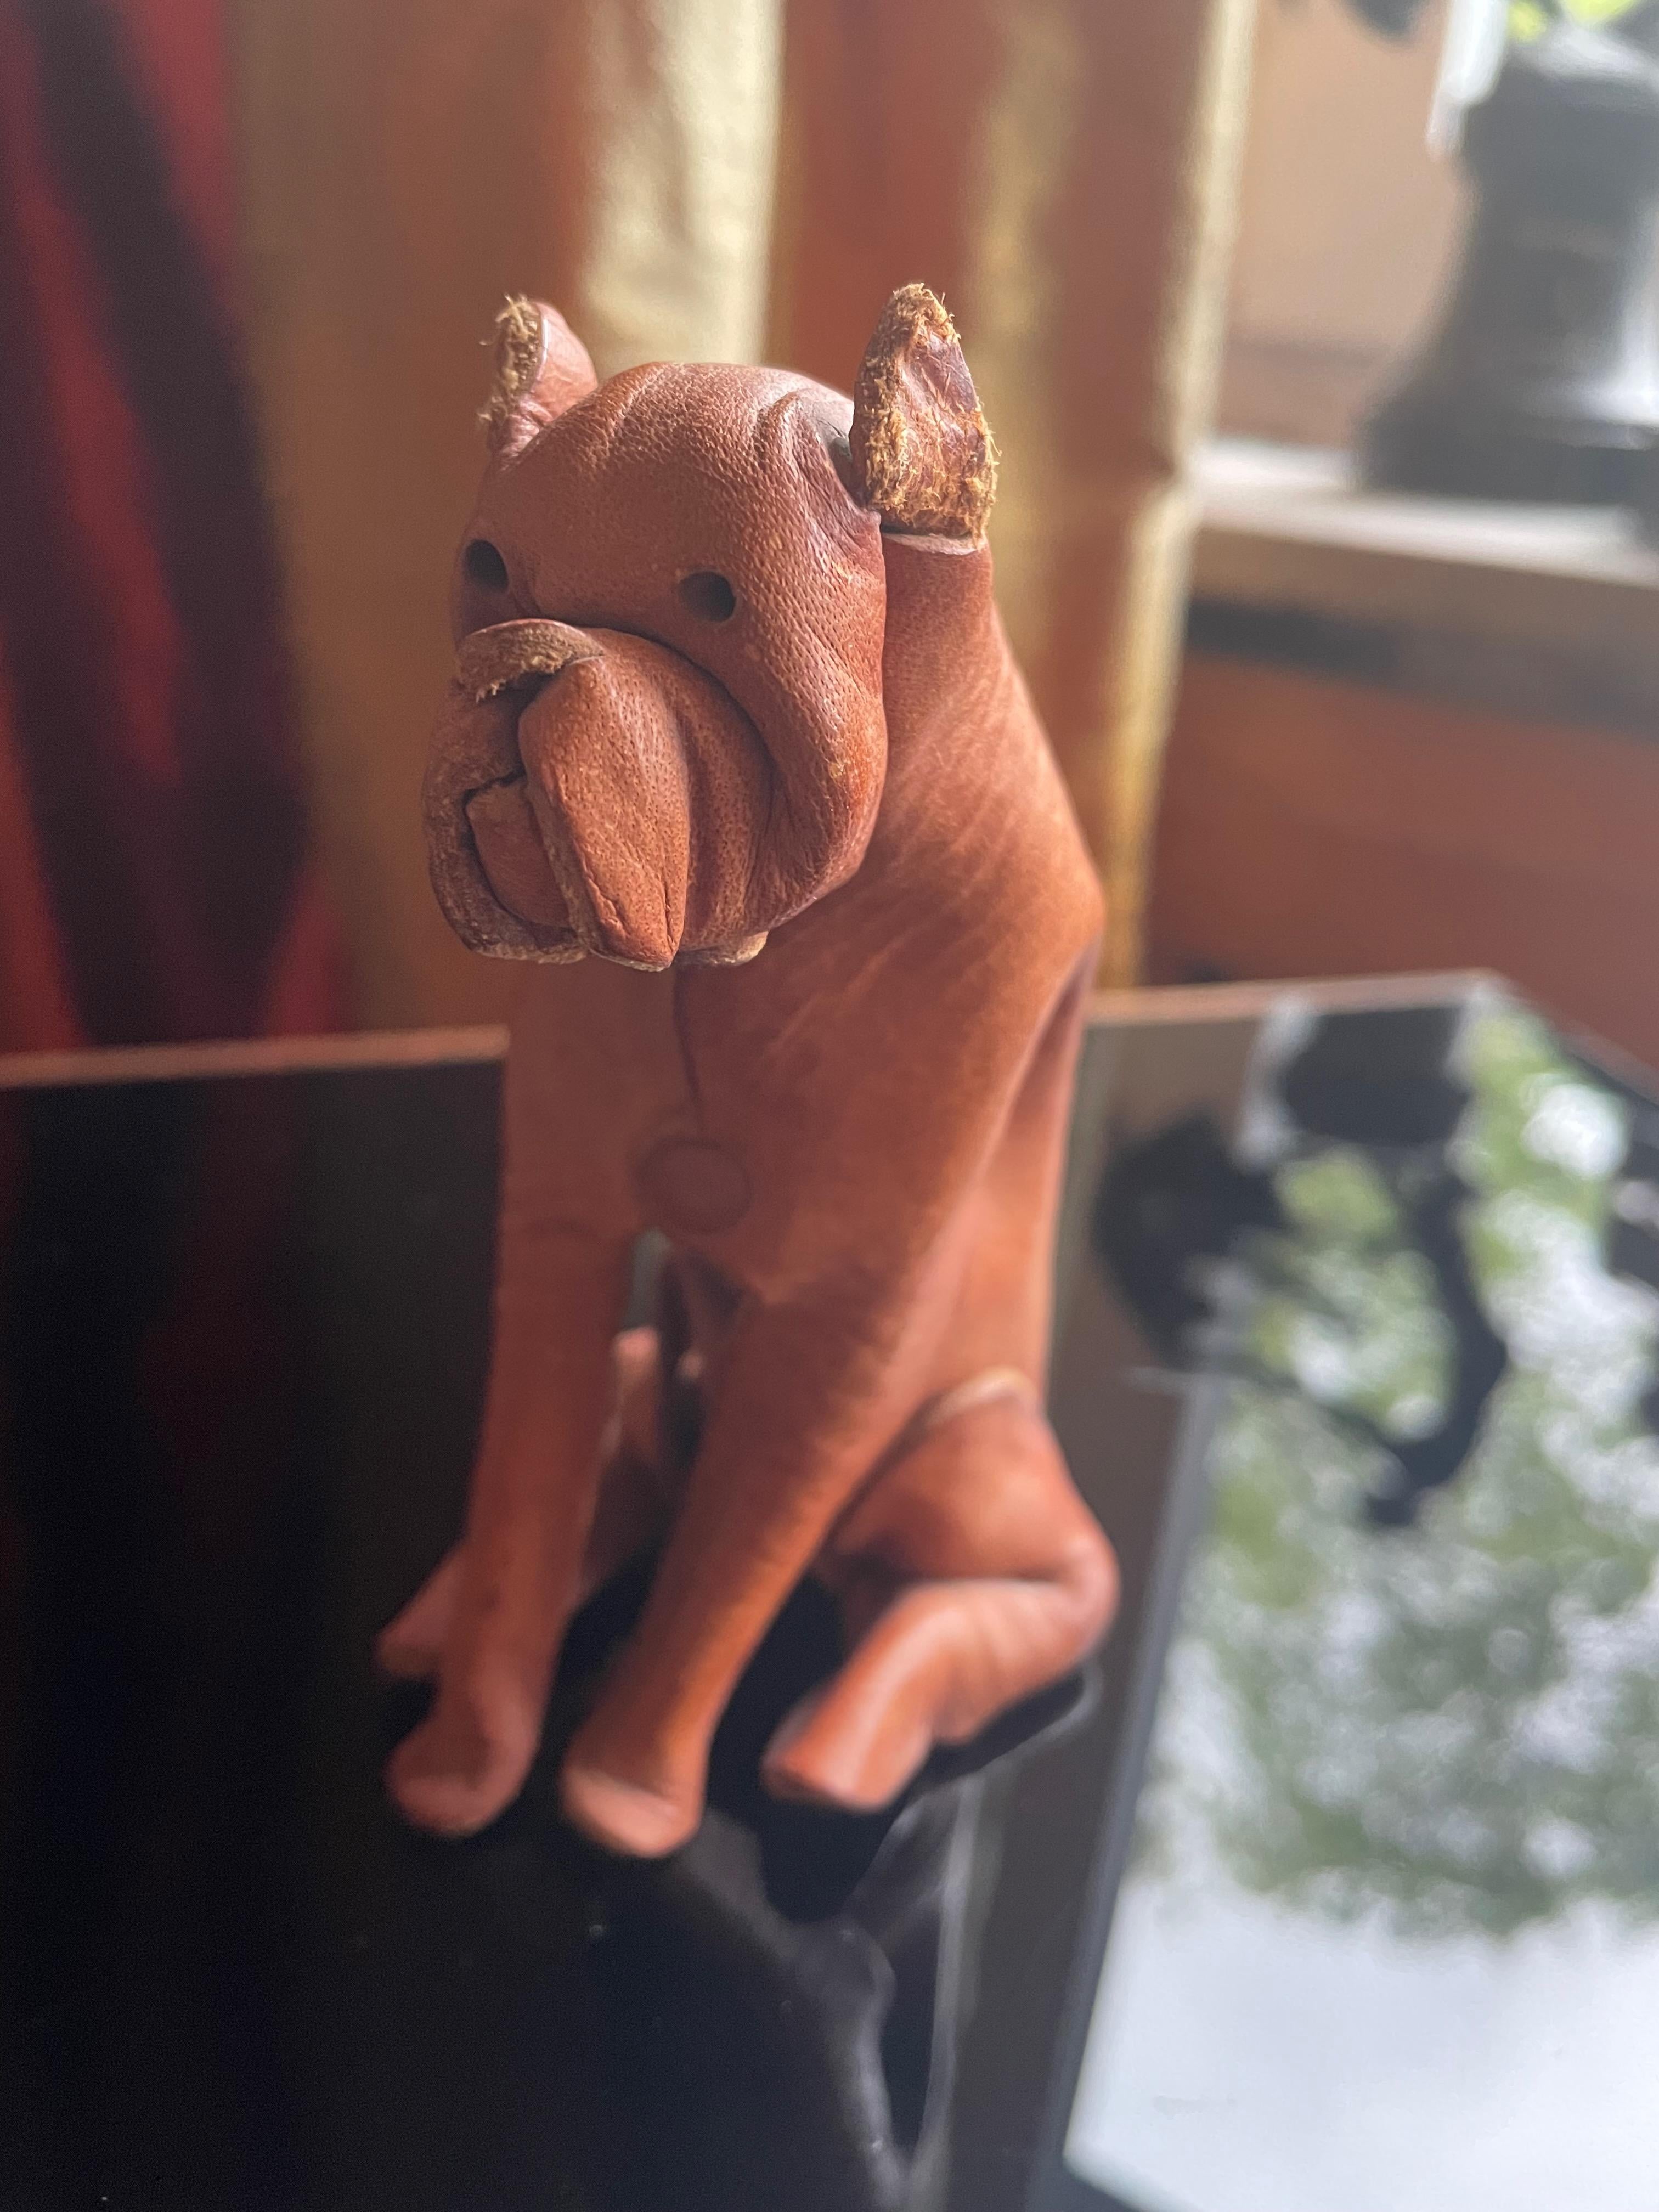 Mid-Century Modern Handmade leather dog/Boxer by DERU, Germany 1960s. For Sale